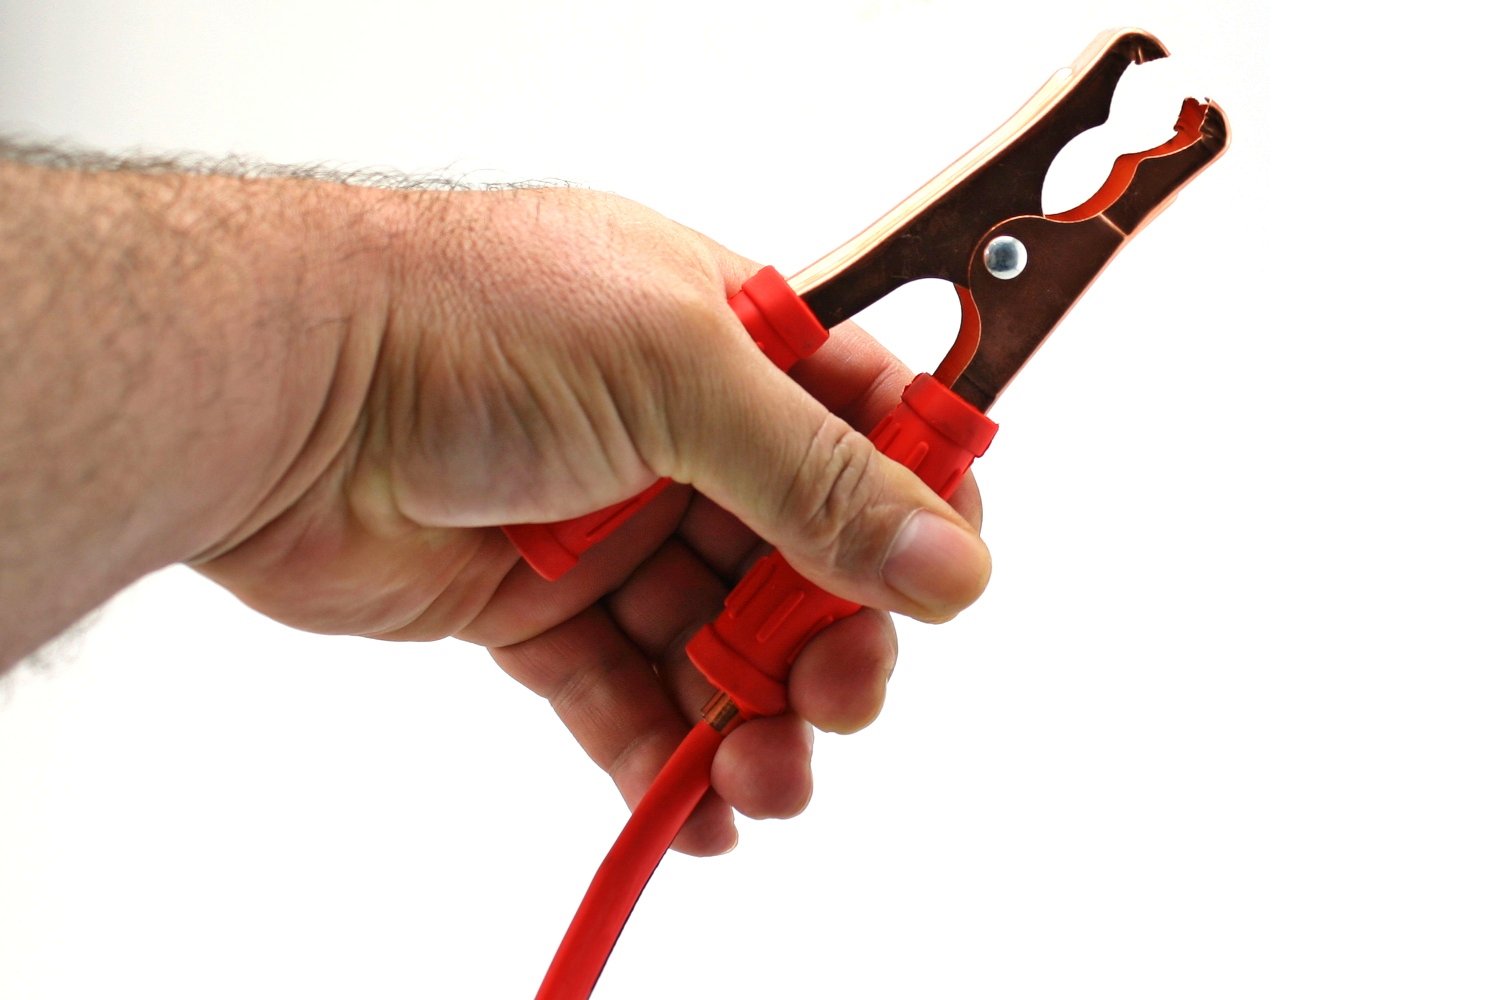 Jumper cables and hand, Assistance, Positivity, Jumper, Line, HQ Photo